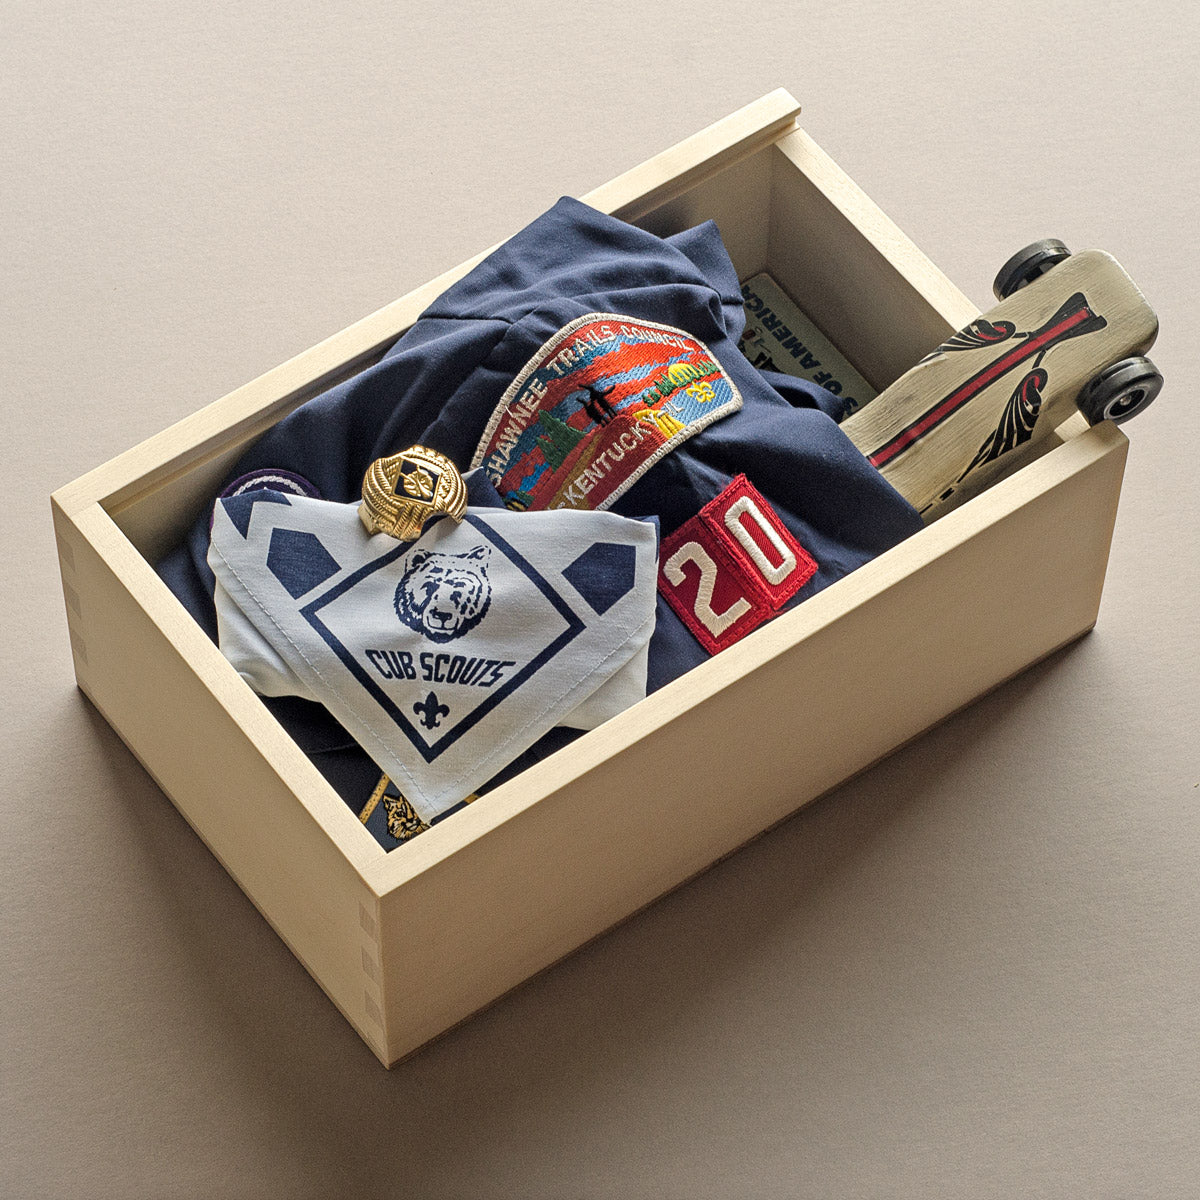 15 Cool (And Useful) Gifts For Cub Scout Dads (and Moms!) ~ Cub Scout Ideas